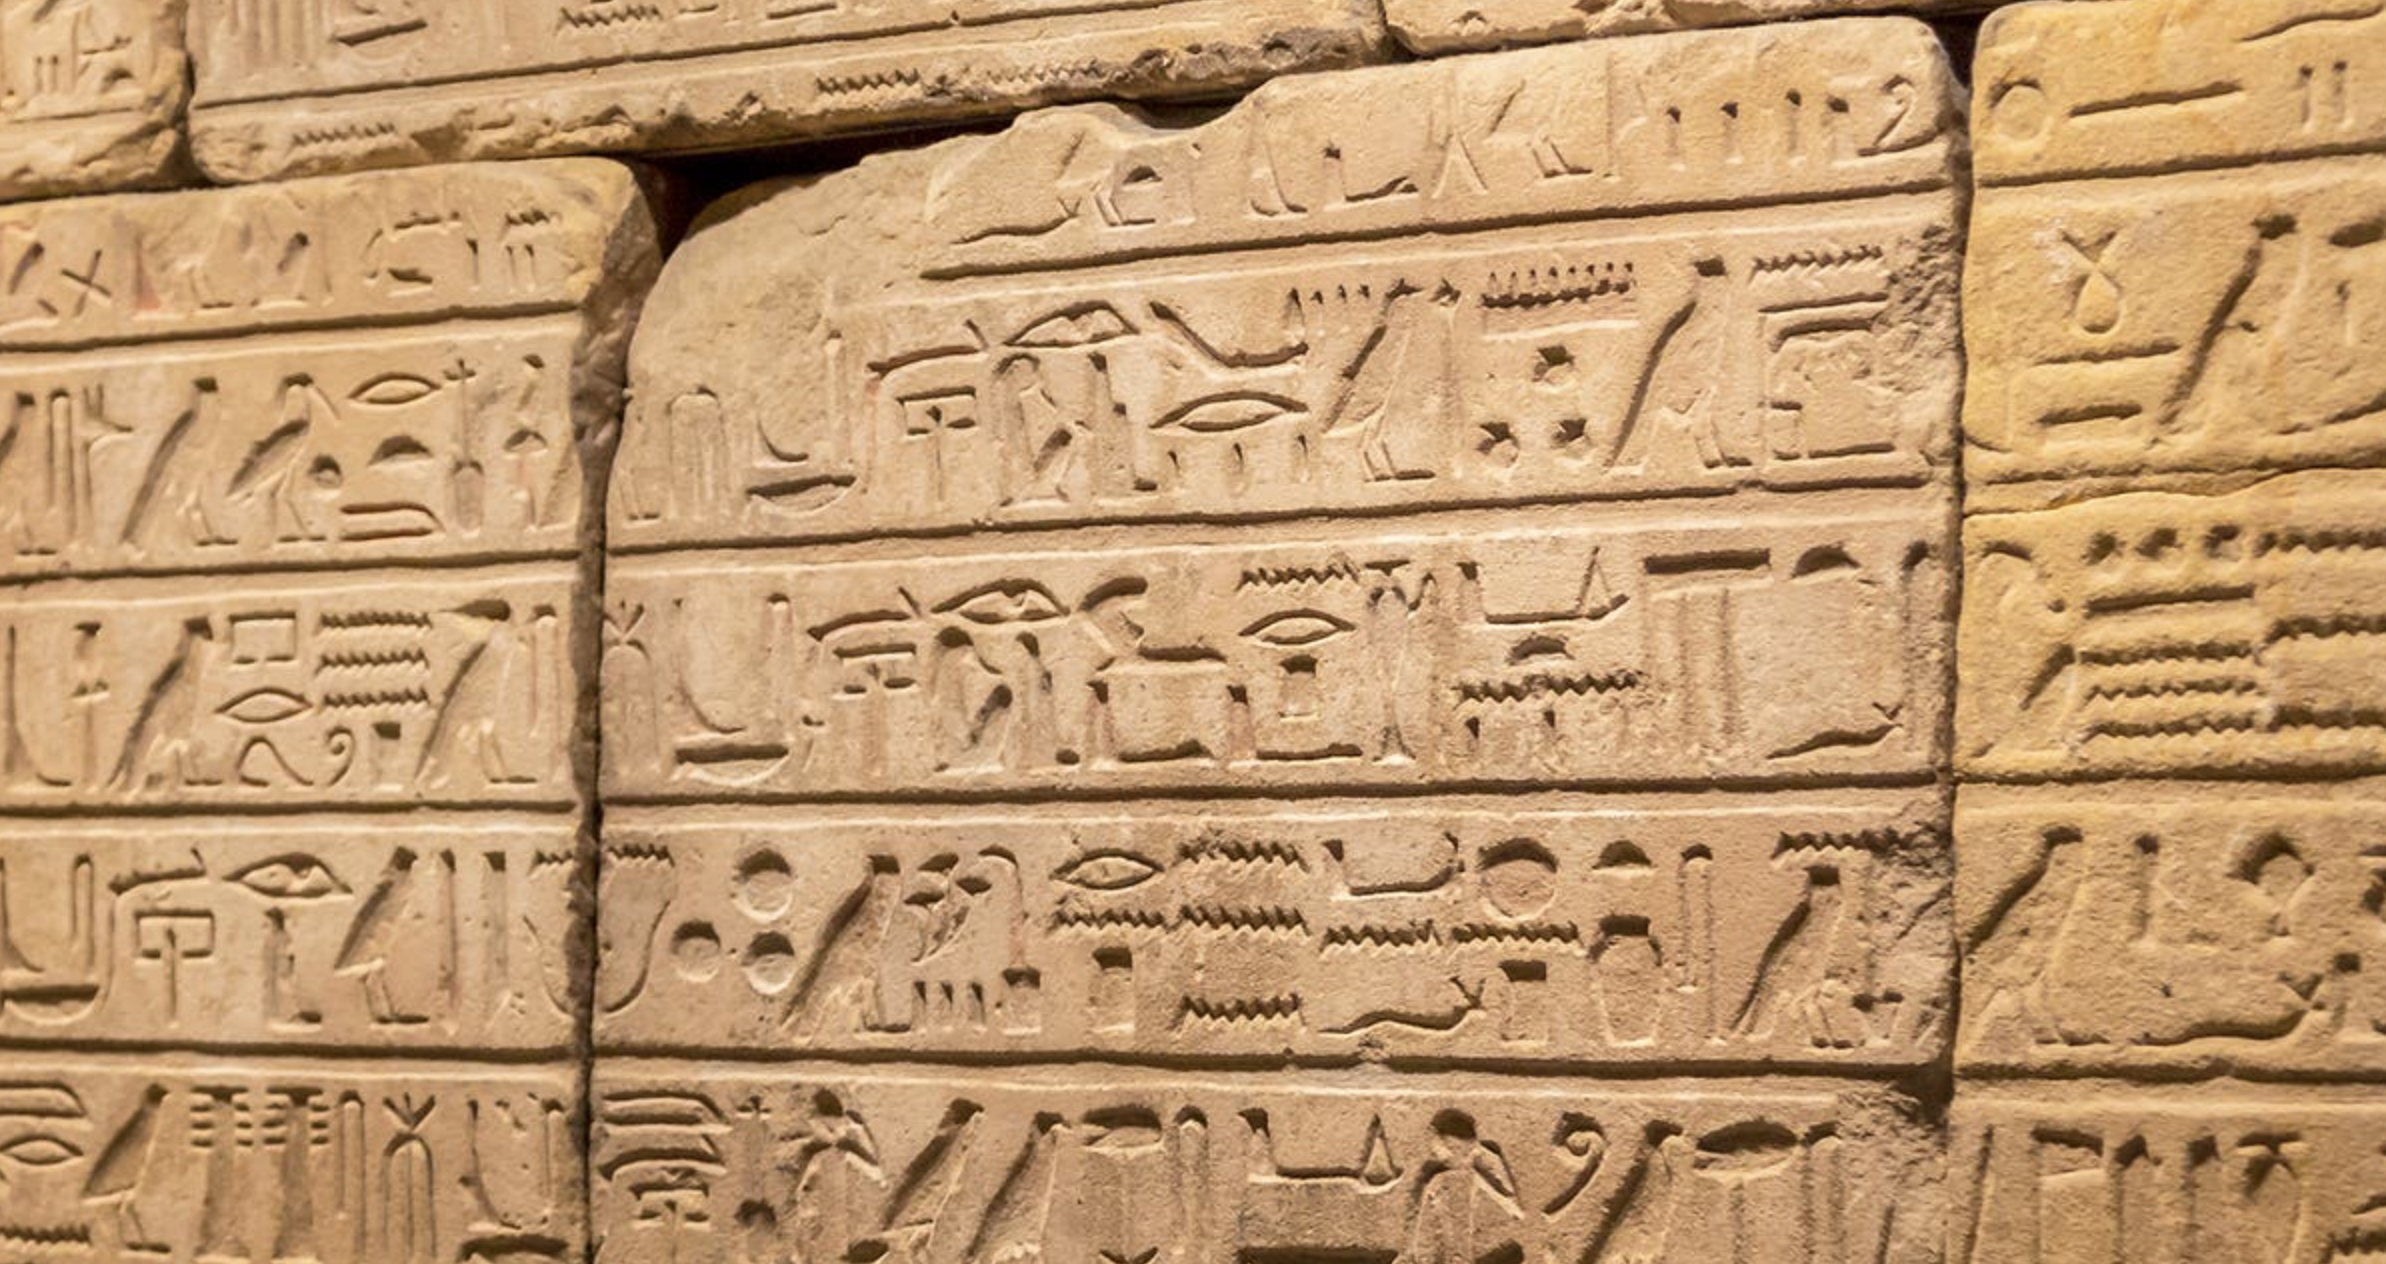 A photograph showing ancient Egyptian hieroglyphs